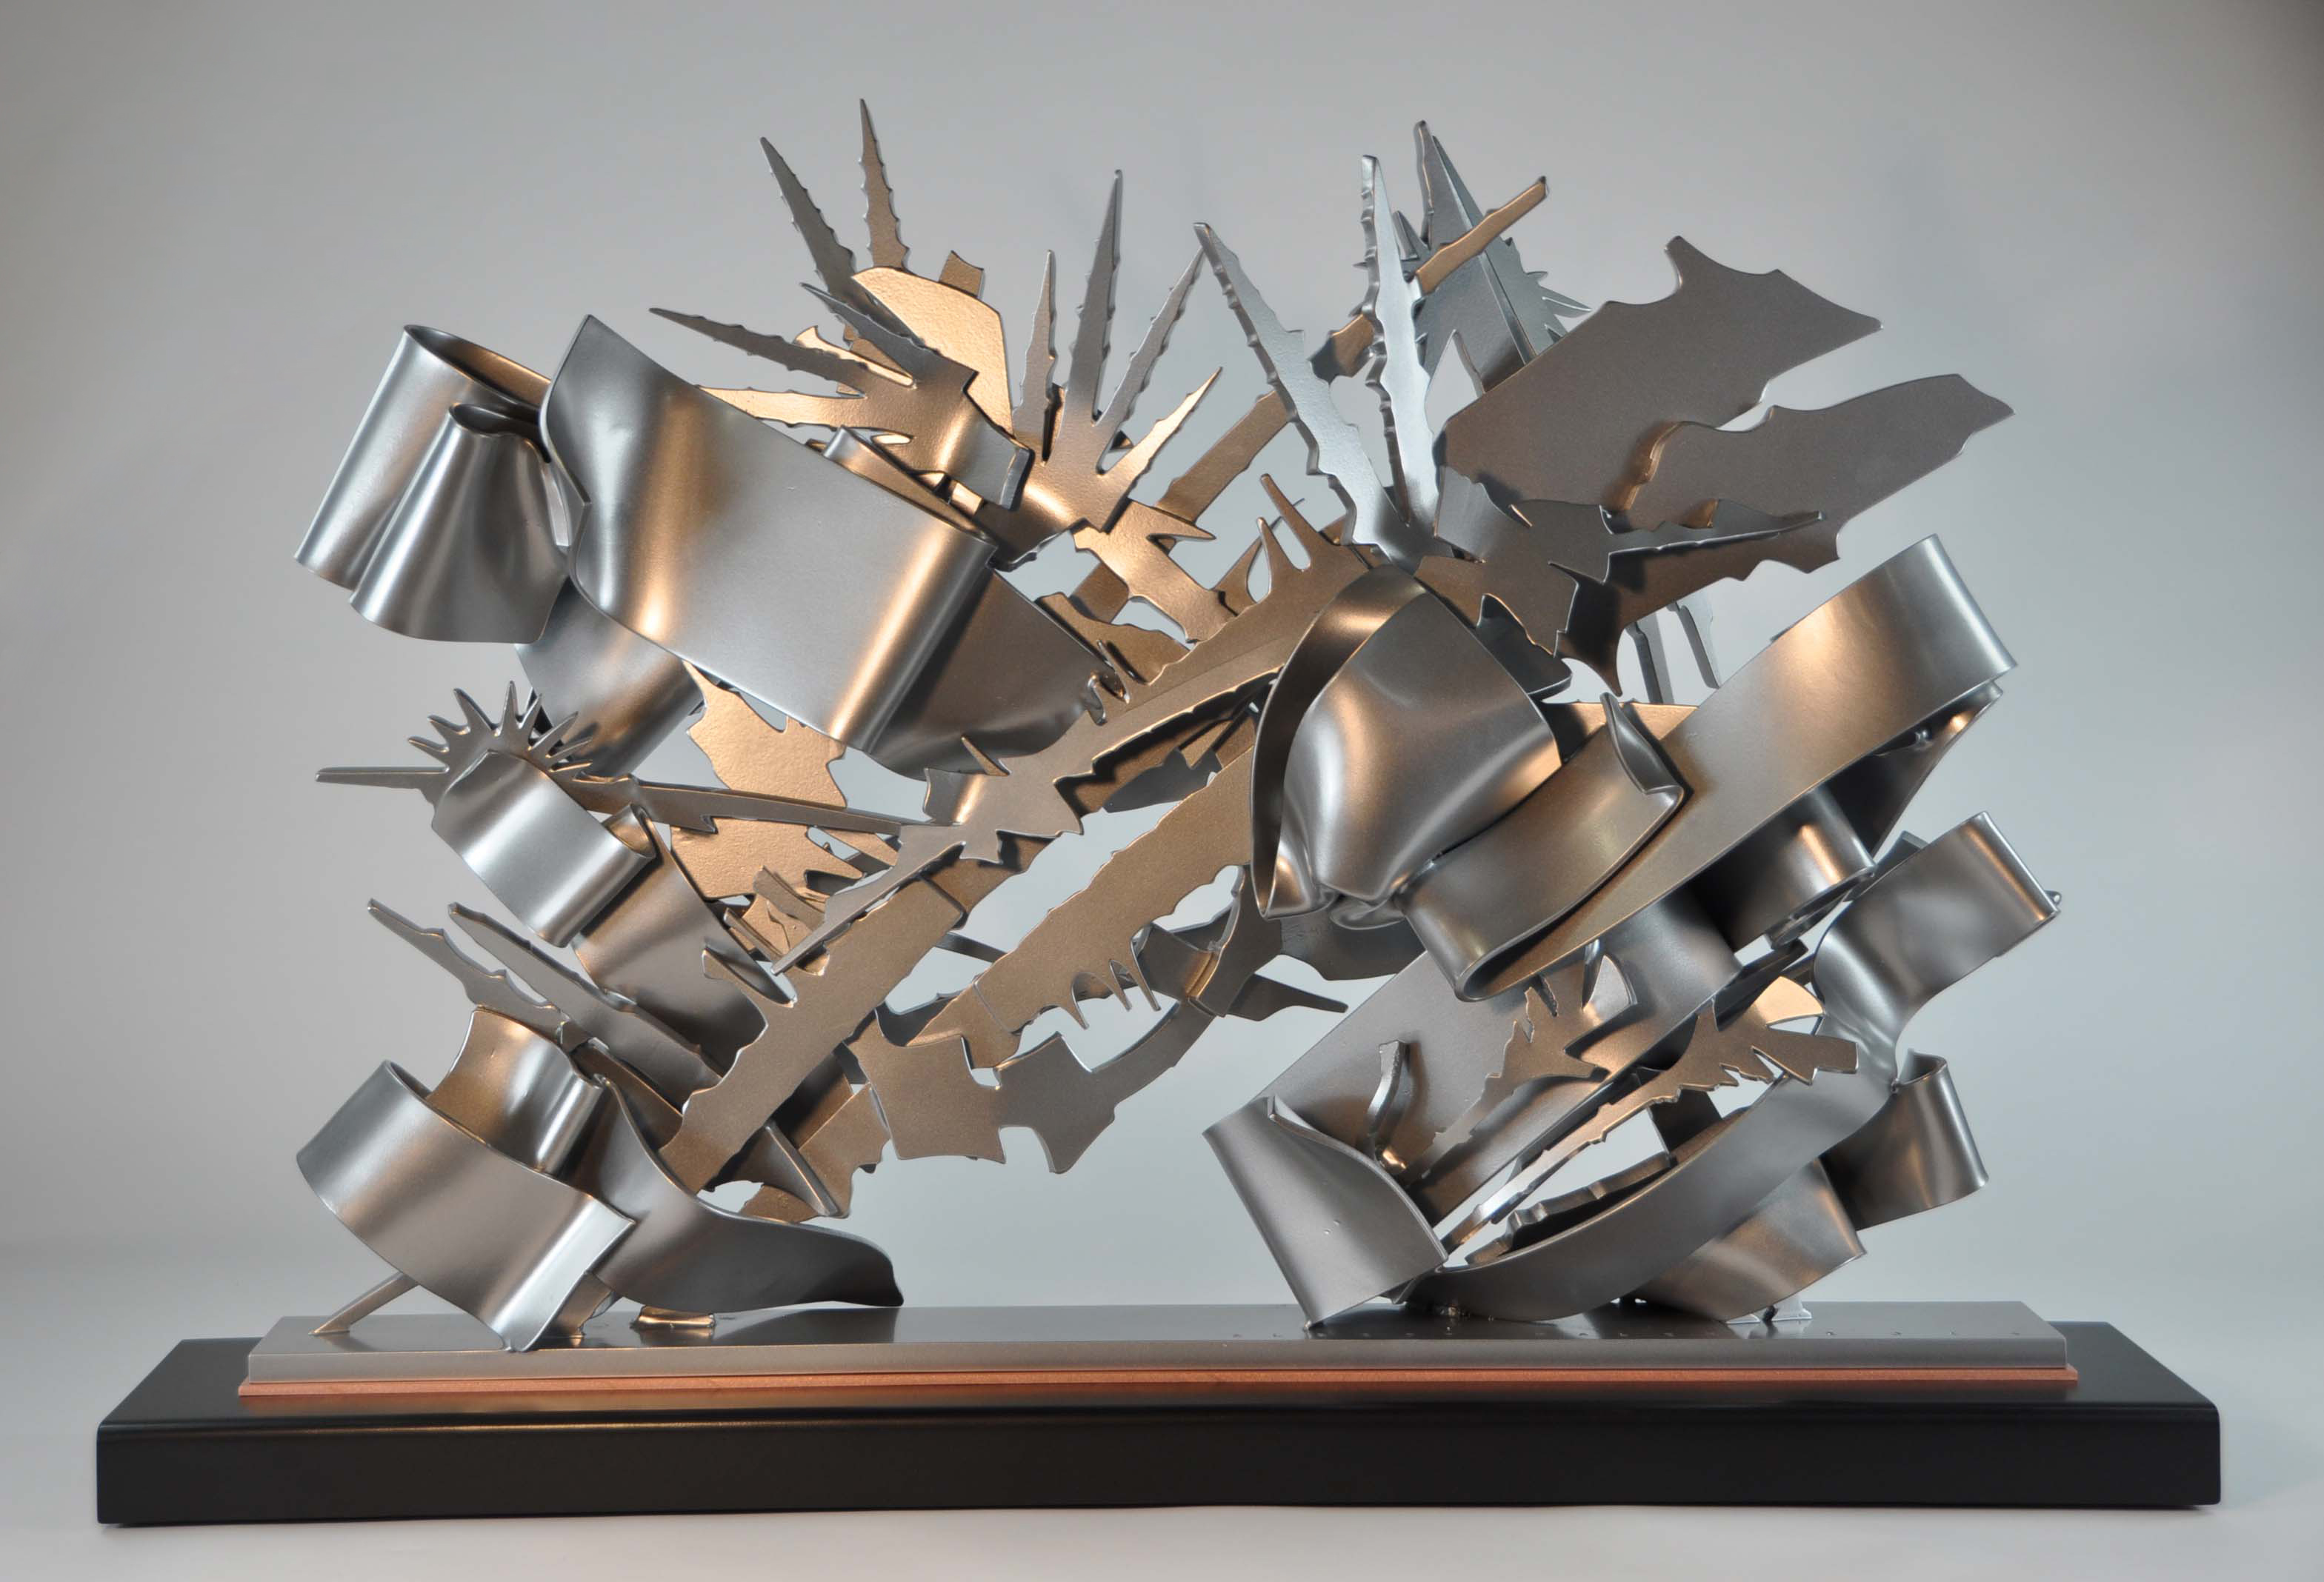 Albert Paley - Double-Cross, 2014, stainless steel, 36 x 53 x 21 inches